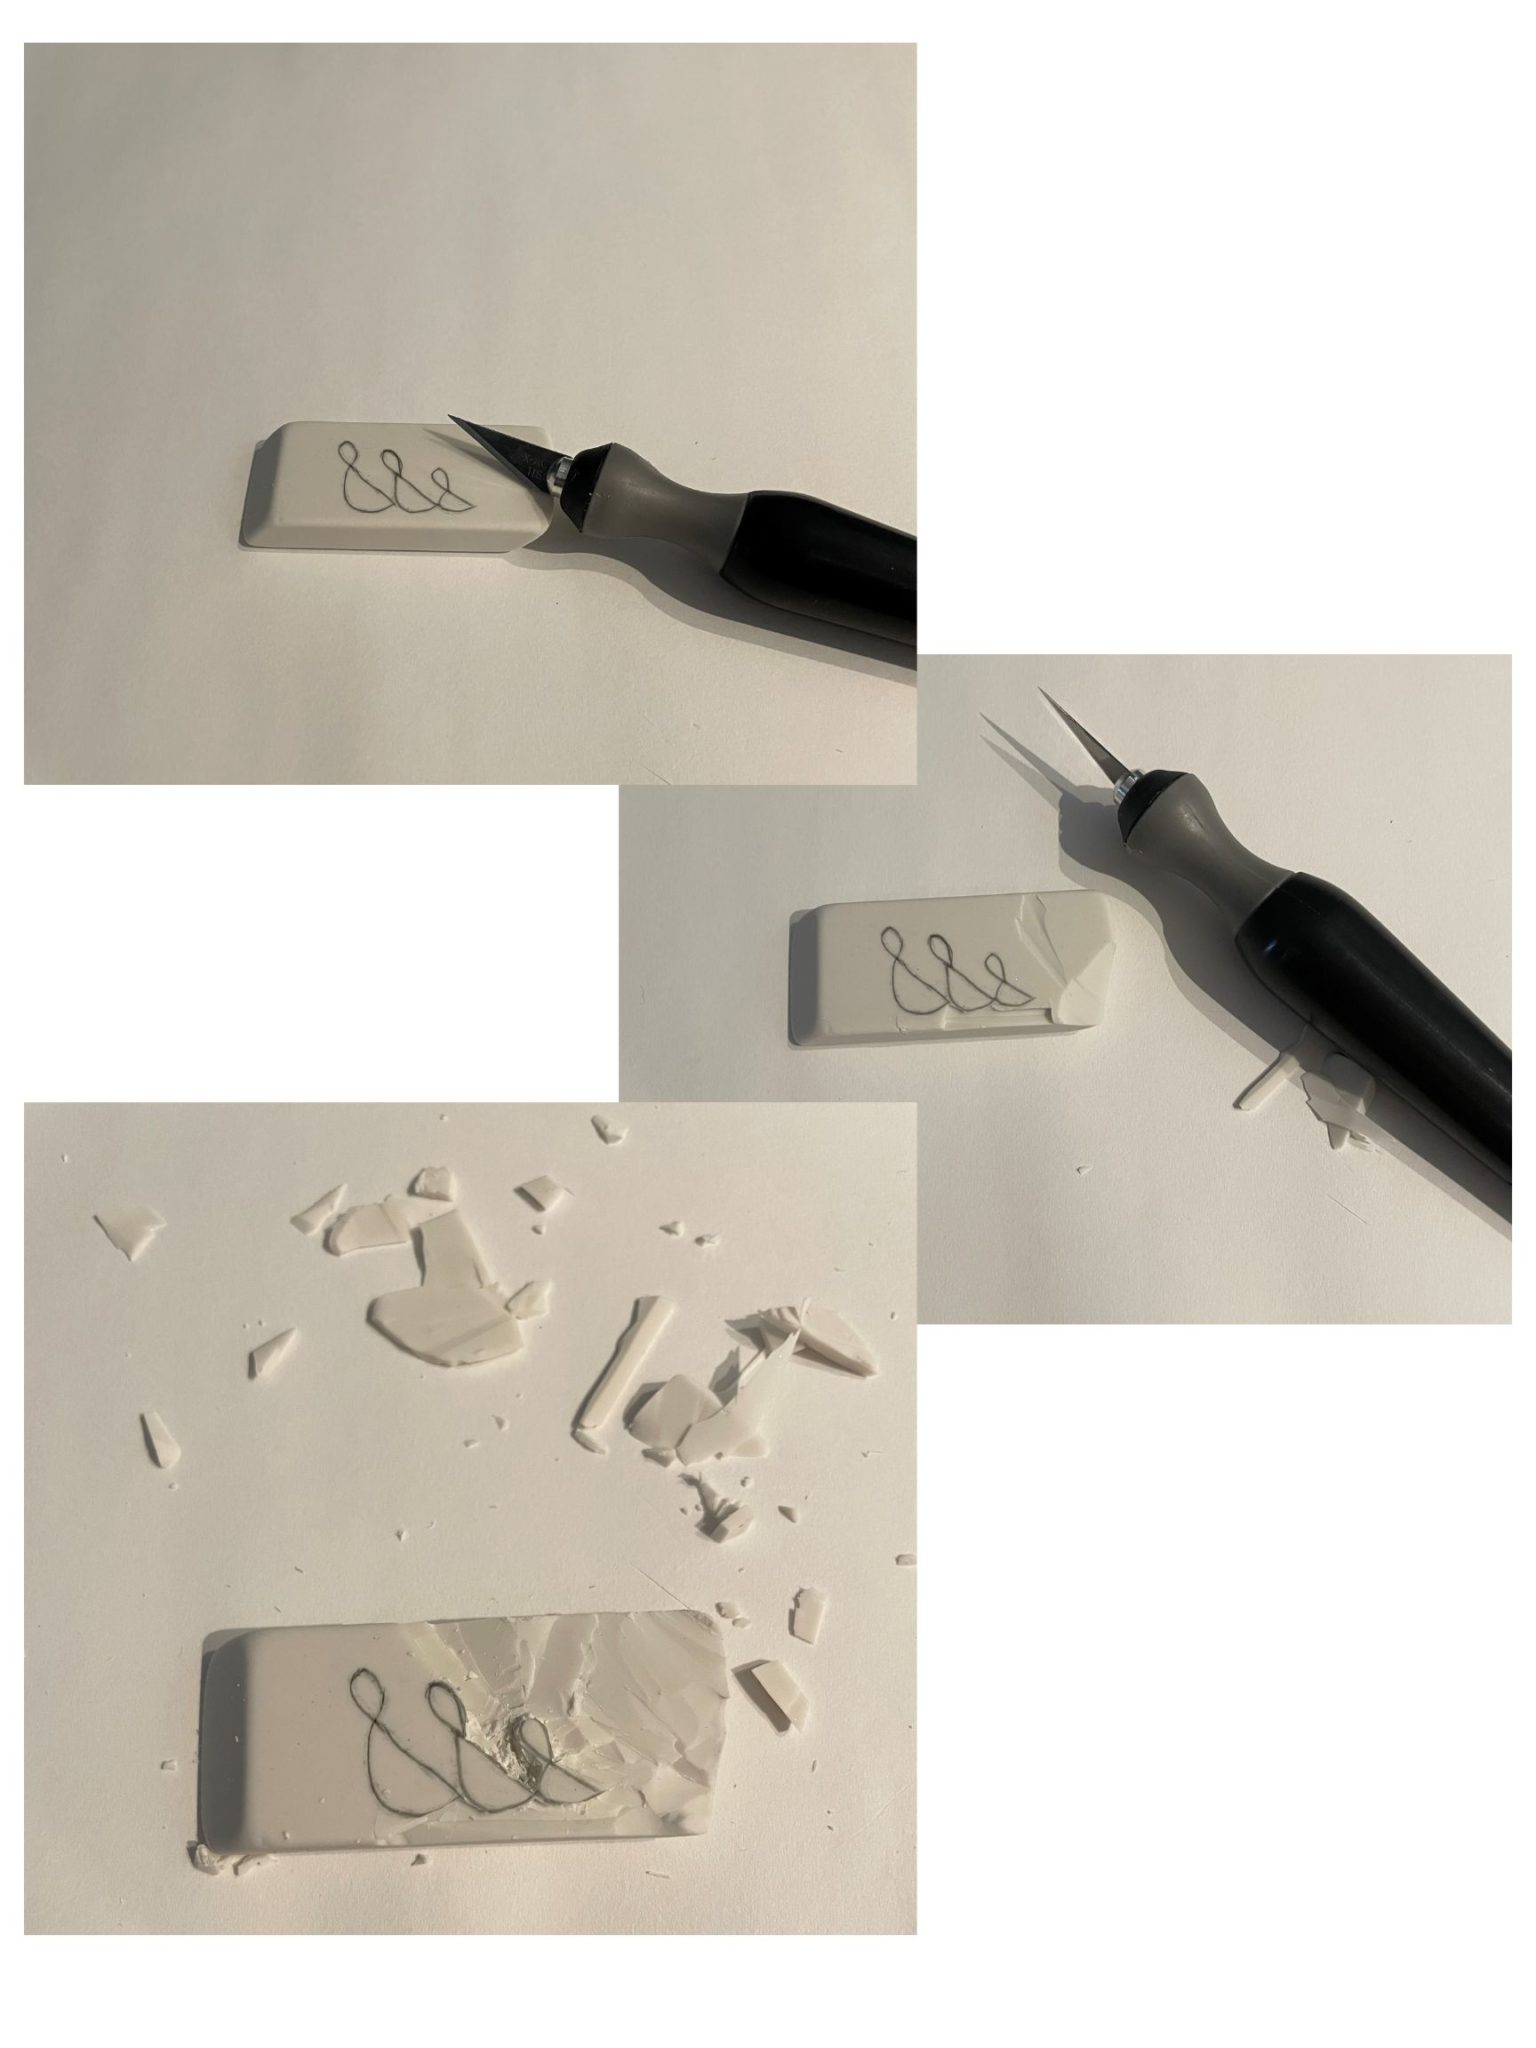 Three images illustrating a white eraser being slowly carved with an X-Acto knife. 